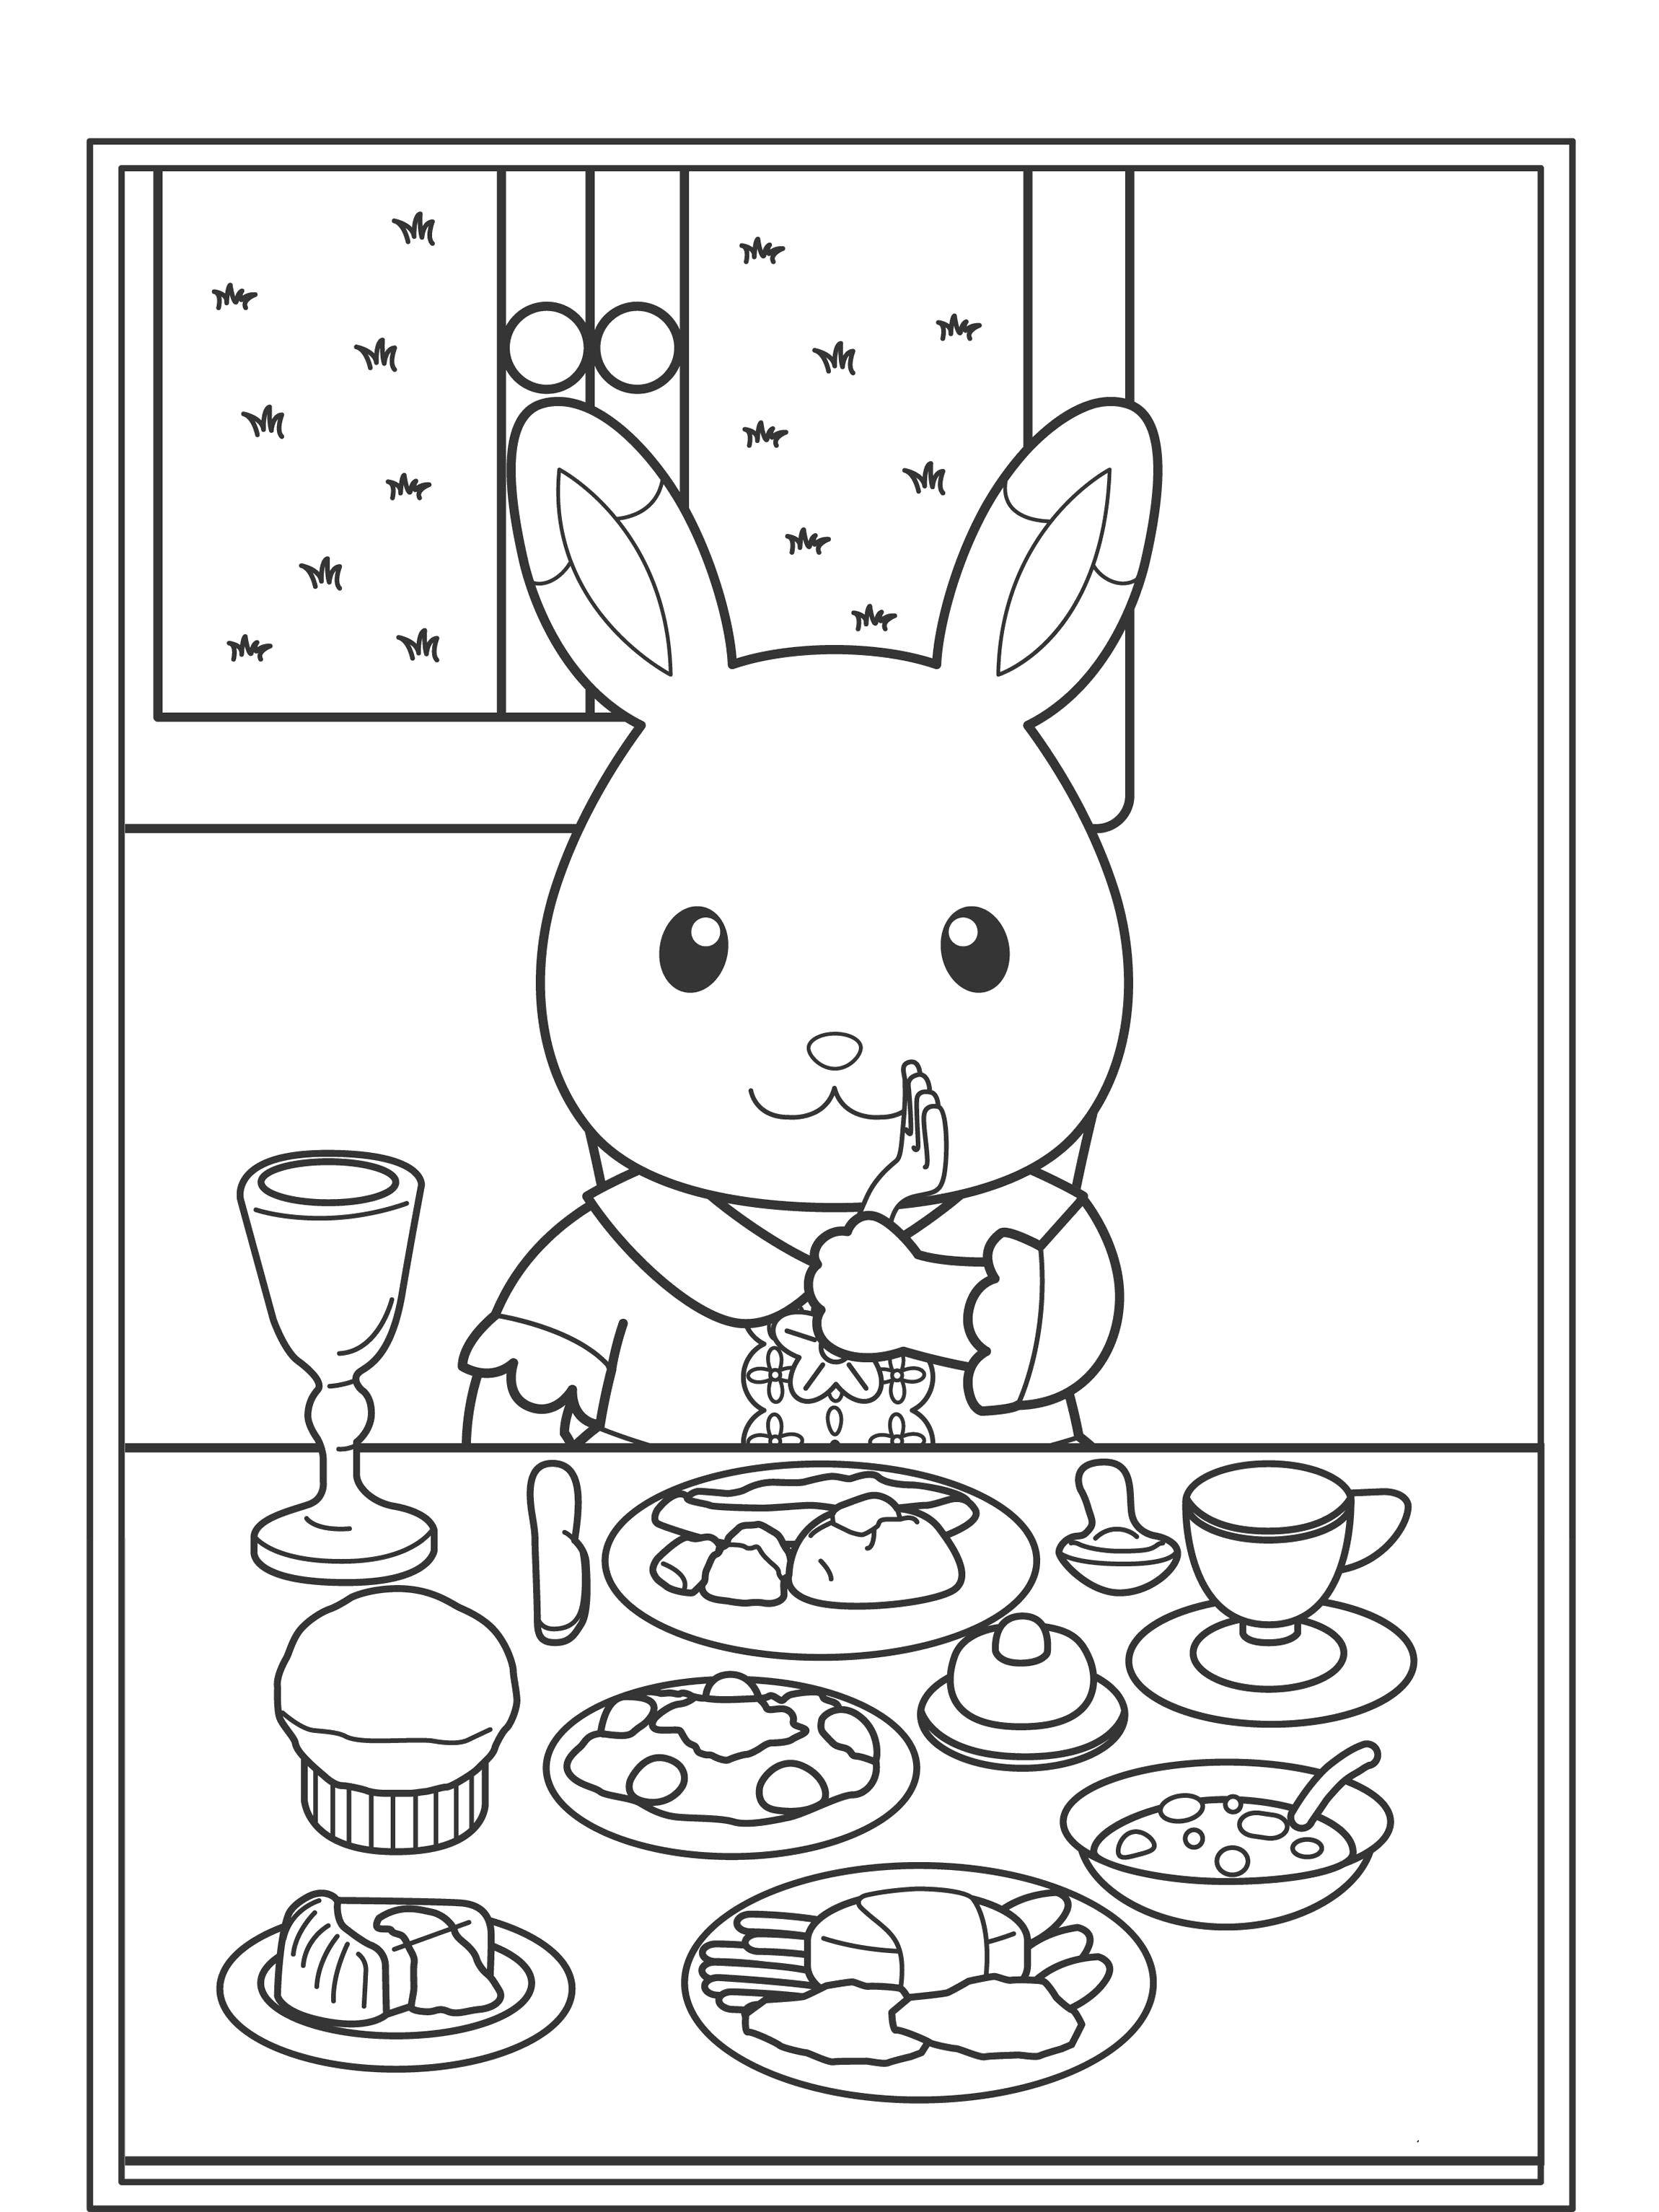 Coloring Bunny for lunch. Category family animals. Tags:  Bunny.